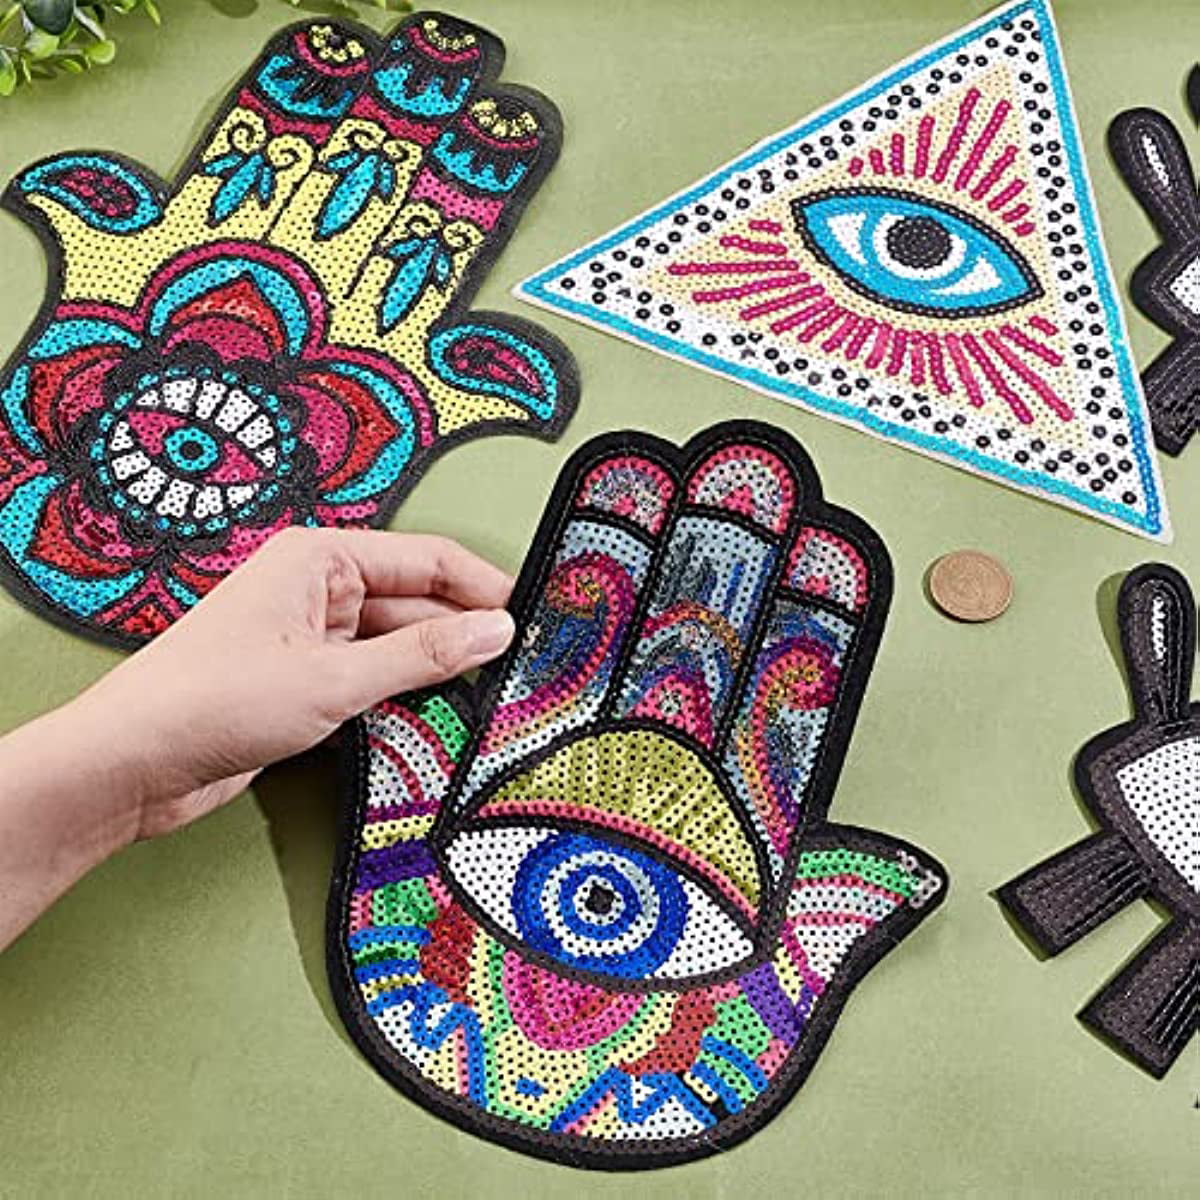 Buy Cute Hand Eye Sequin Patches Embroidery Applique Sew On or